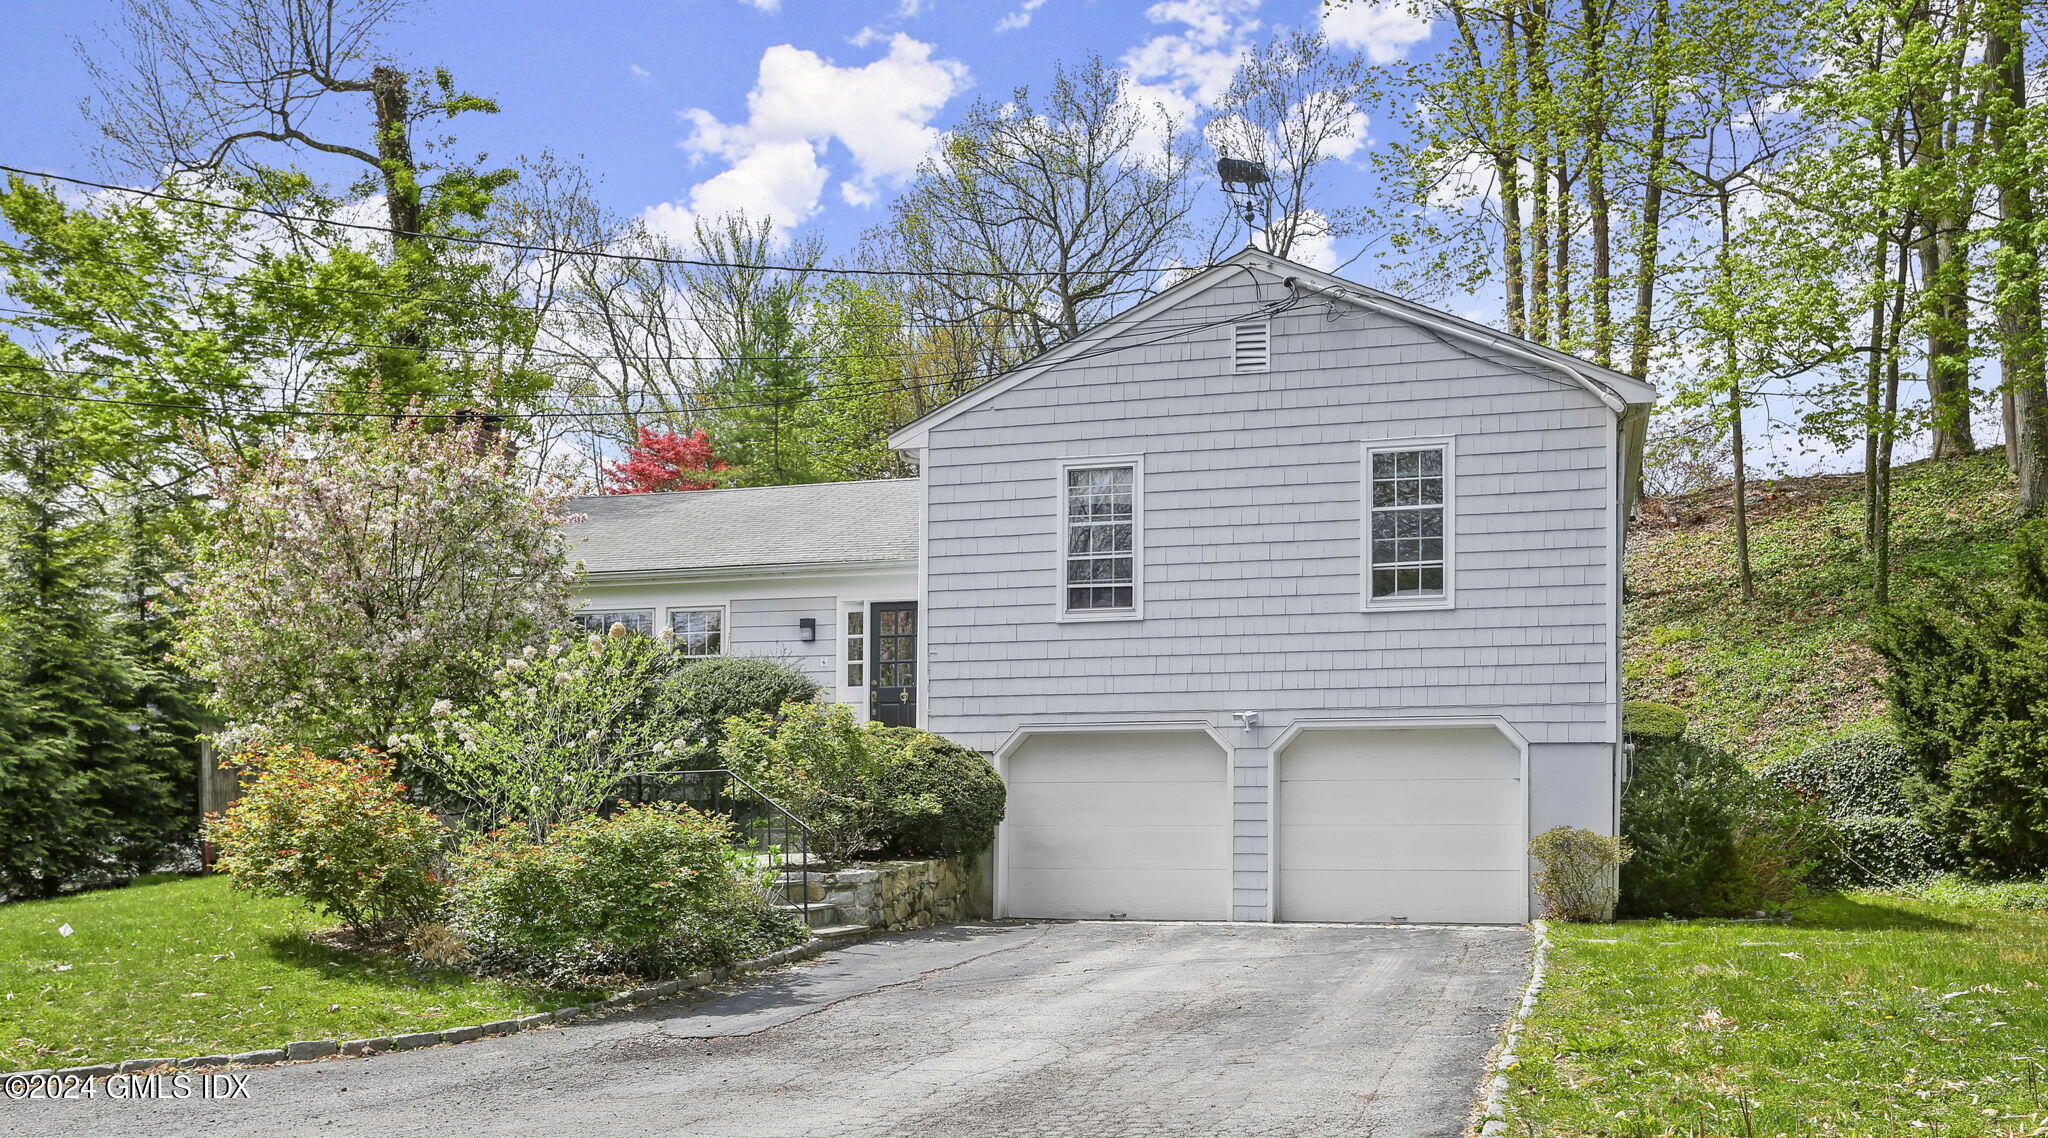 Rental Property at 6 Pintail Lane, Greenwich, Connecticut - Bedrooms: 3 
Bathrooms: 2  - $7,000 MO.